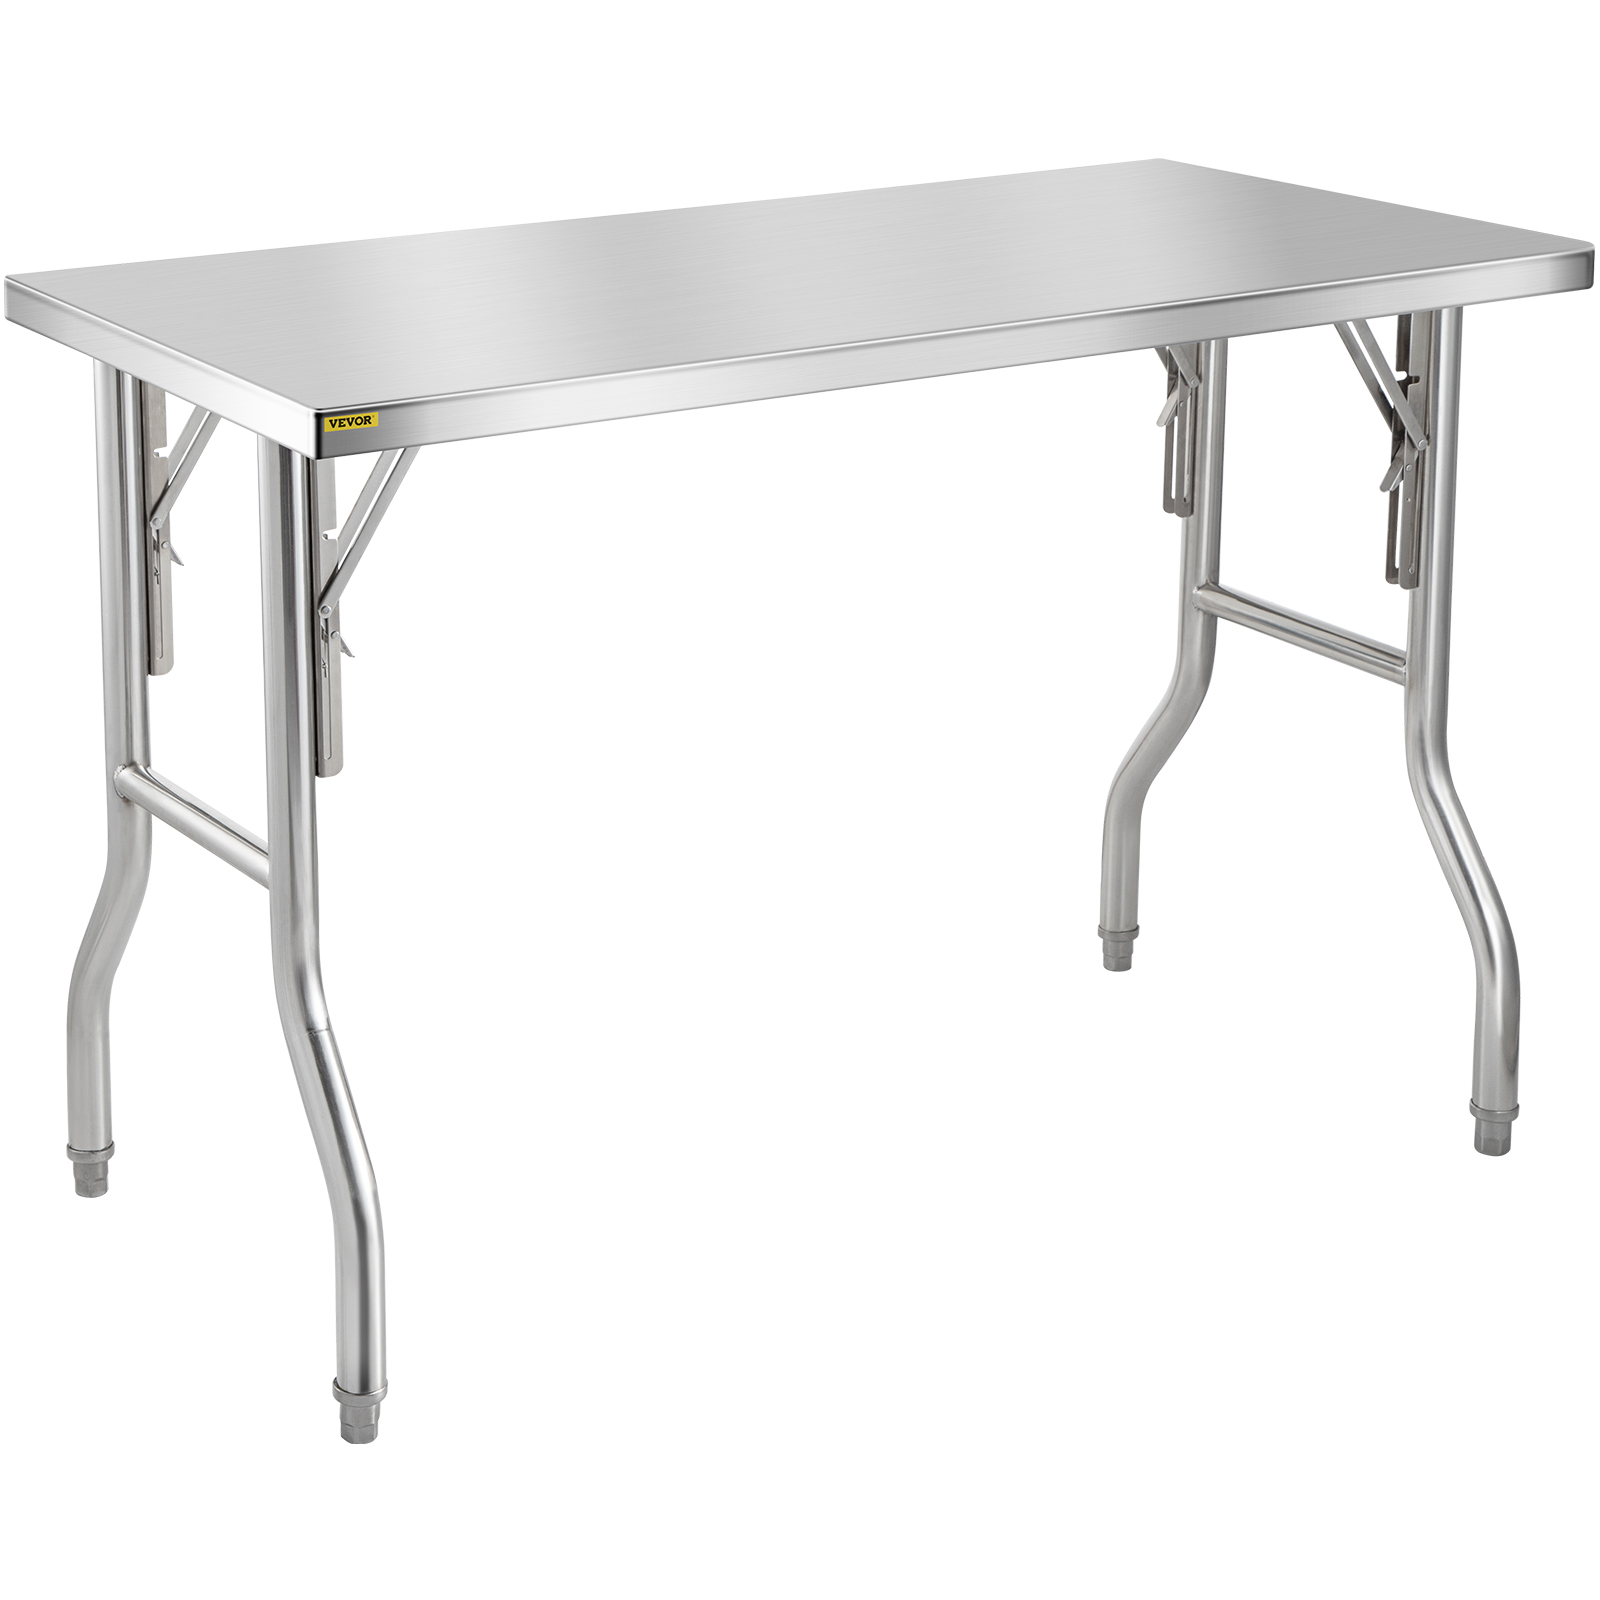 Vevor Commercial Stainless Steel Folding Work Prep Tables Open Kitchen 48"x24 от Vevor Many GEOs